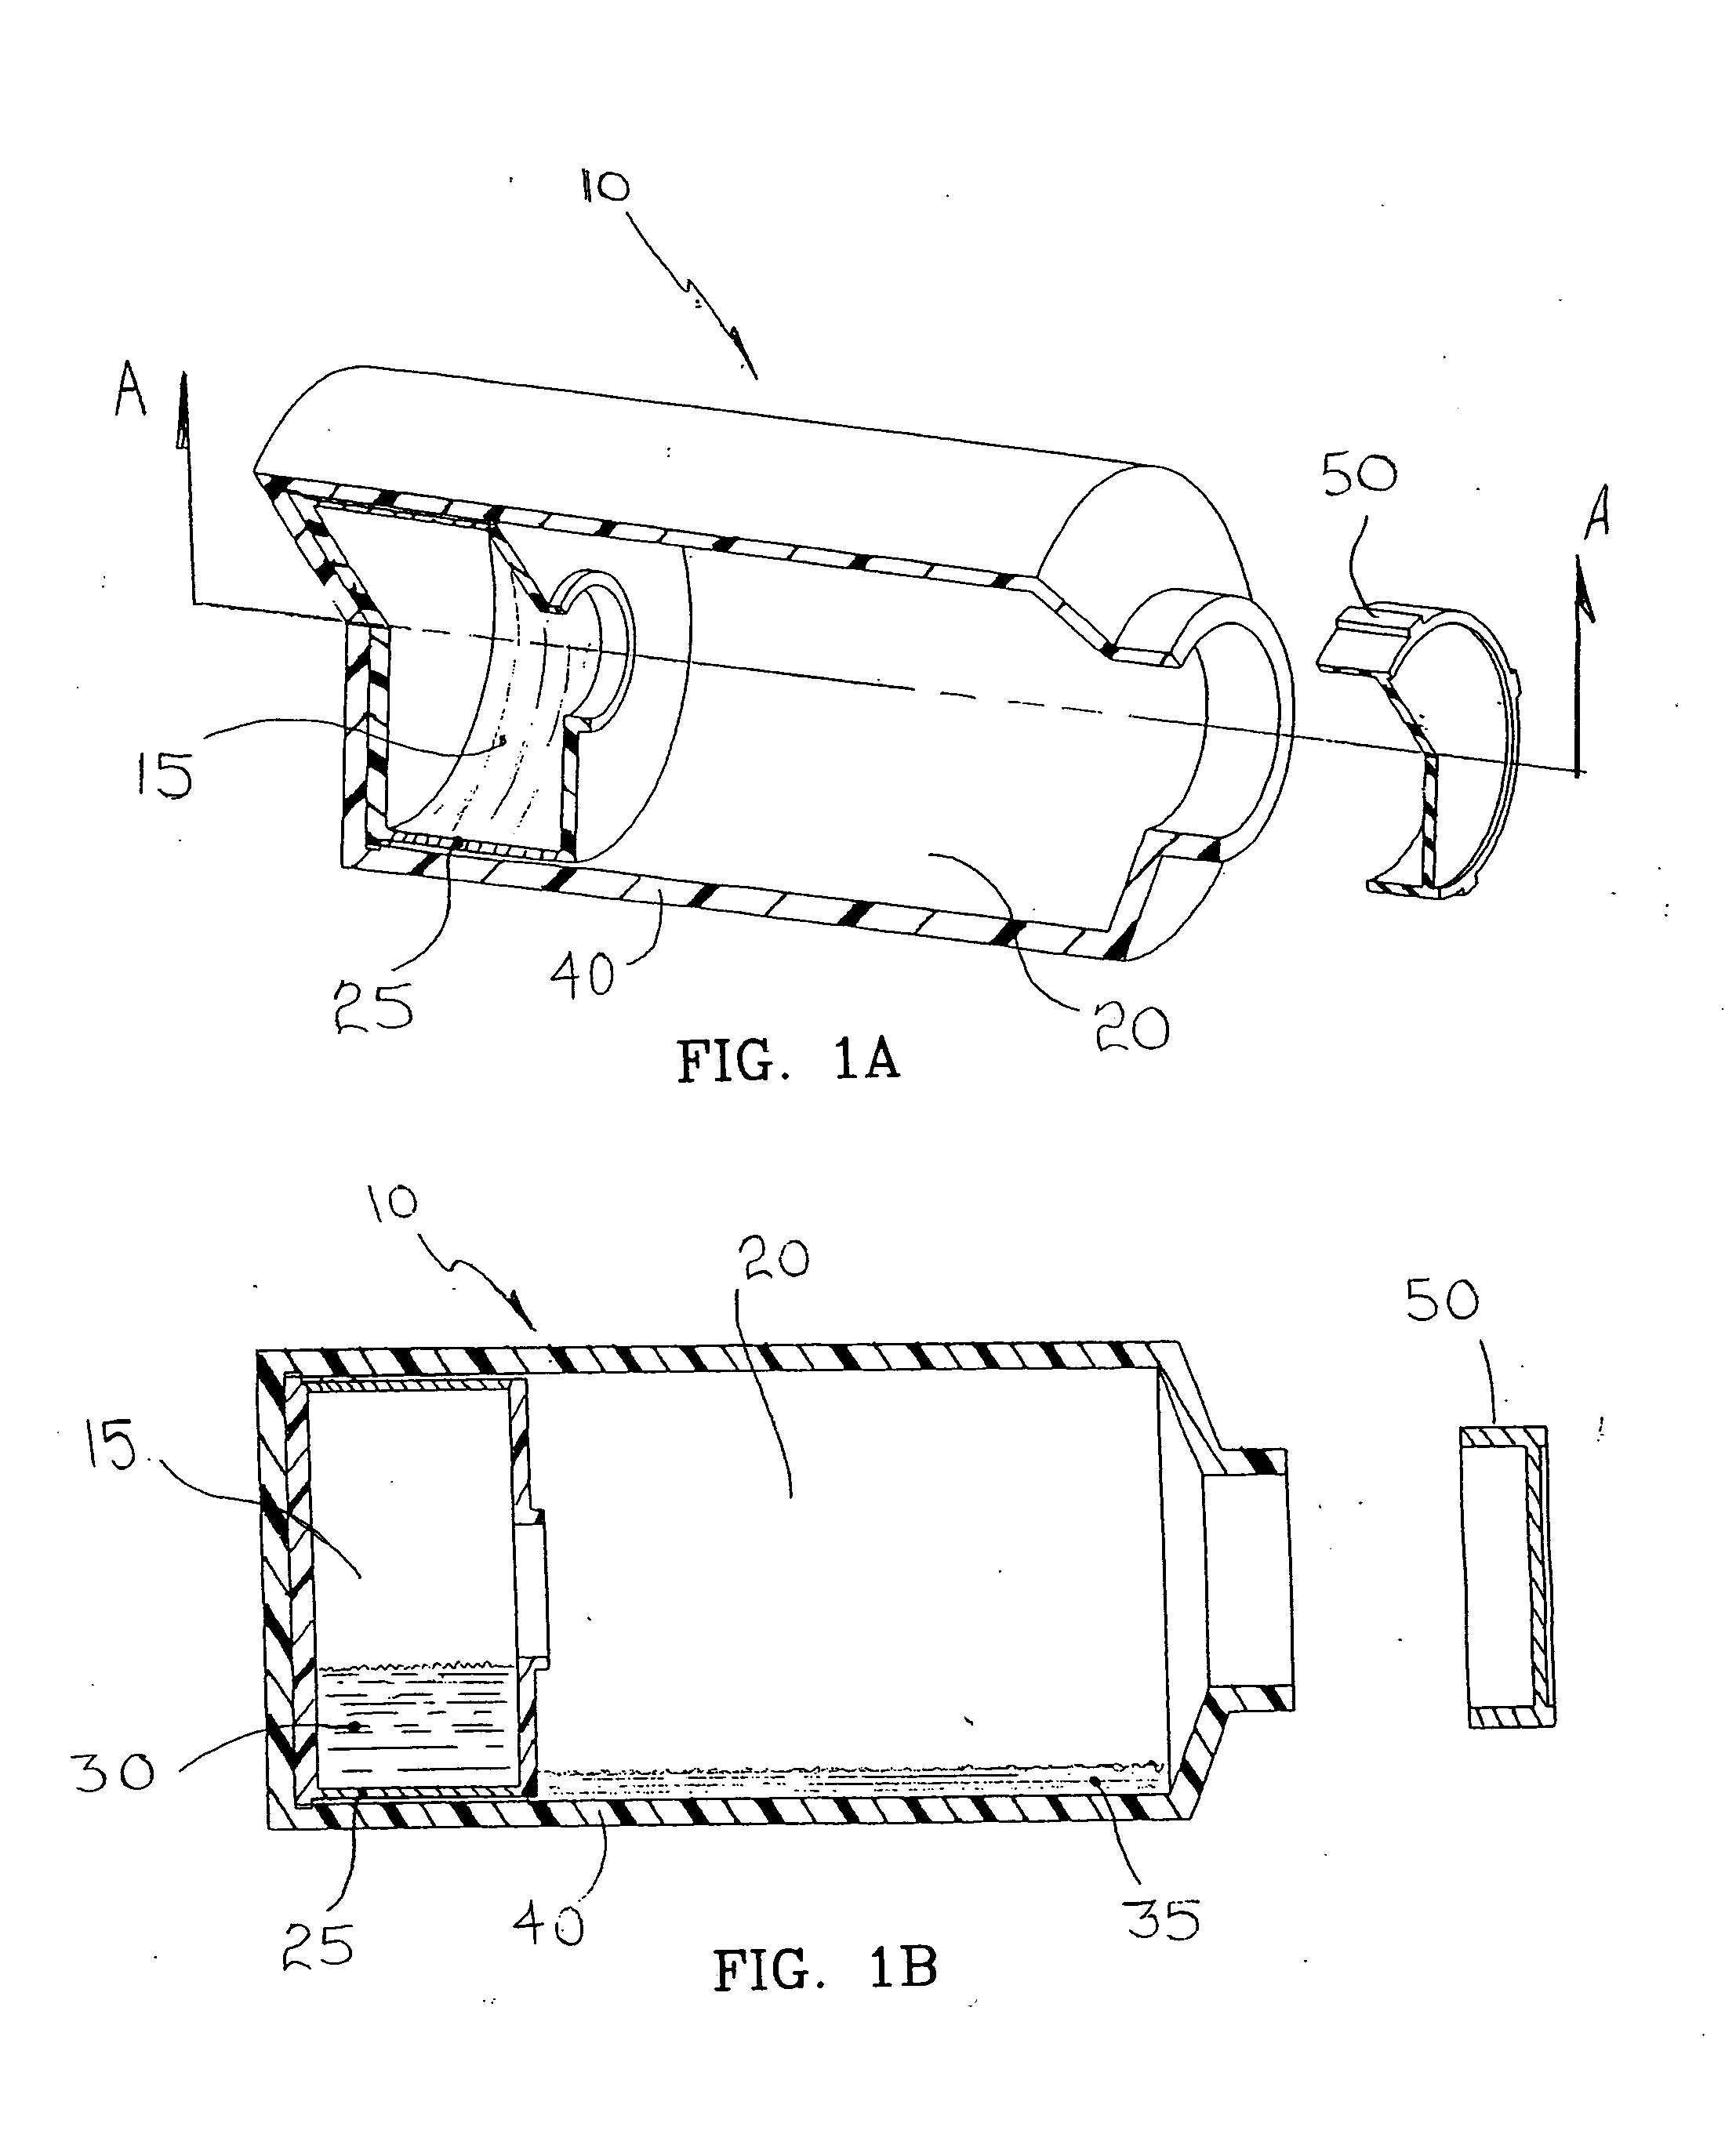 Compartmentalized device for cell culture, cell processing, and sample dialysis